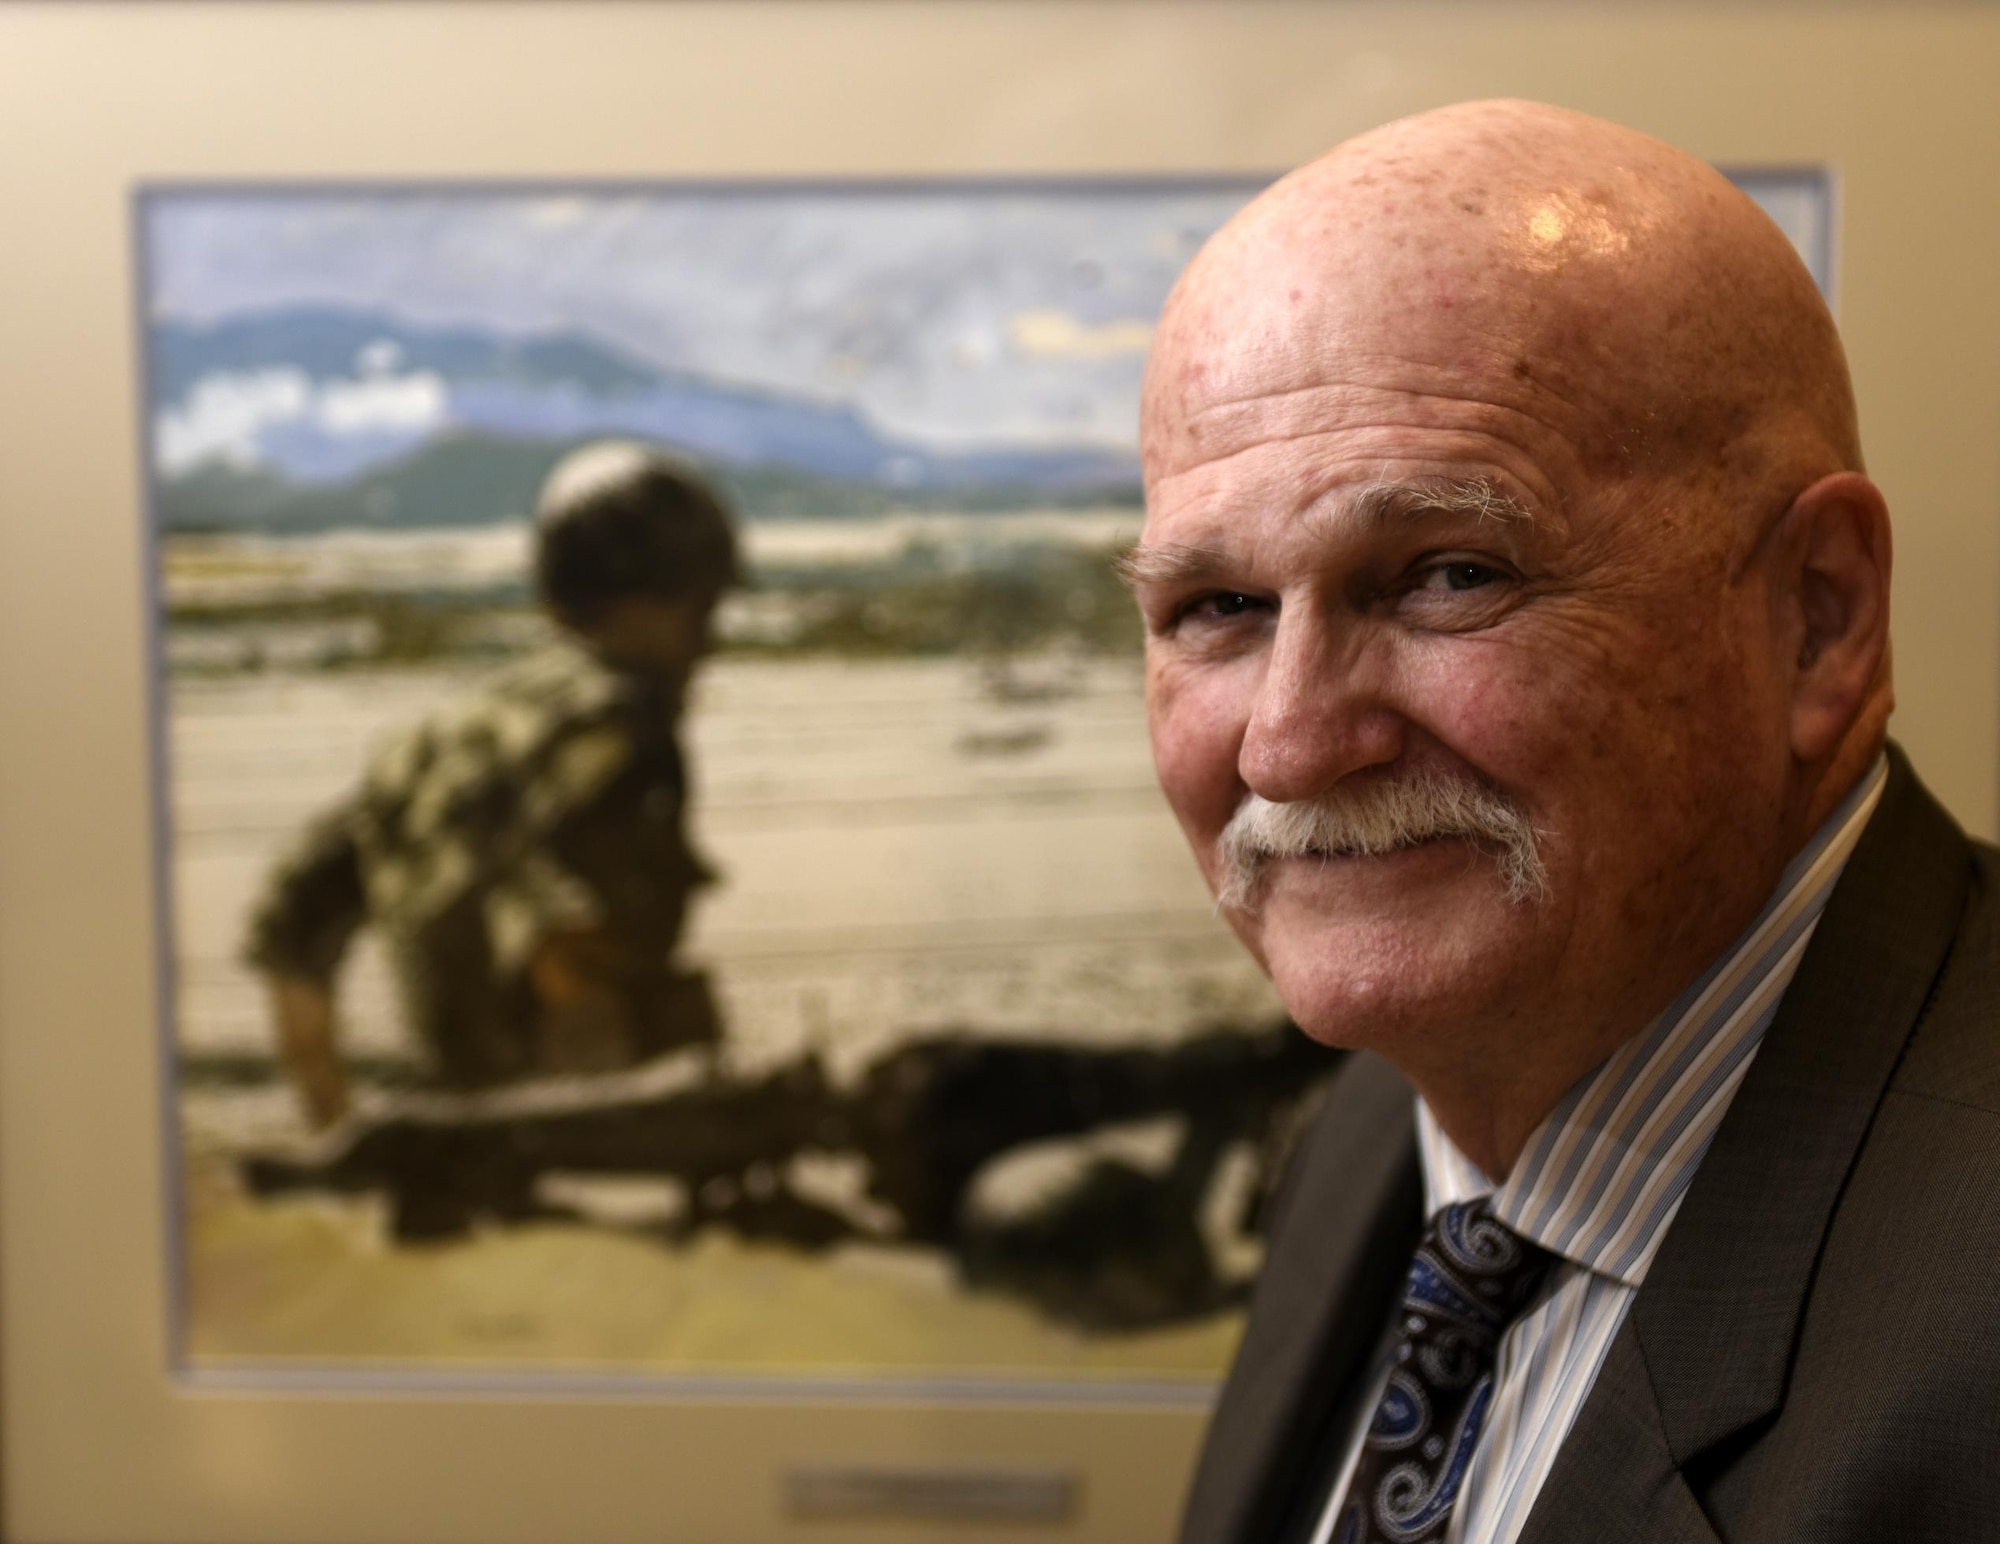 Bradley Riker, a Vietnam veteran who currently works as an Air Force intelligence staff officer, attends the opening of the 50th commemoration of the Vietnam War art display in the Air Force Art Gallery located in the Pentagon, Washington, D.C., May 26, 2016. According to Riker, the painting that spoke to him the most was “Perimeter Guard – Cam Ranh Bay, F-4” because he actually lived on the hill shown in the painting. (U.S. Air Force photo/Tech. Sgt. Bryan Franks)